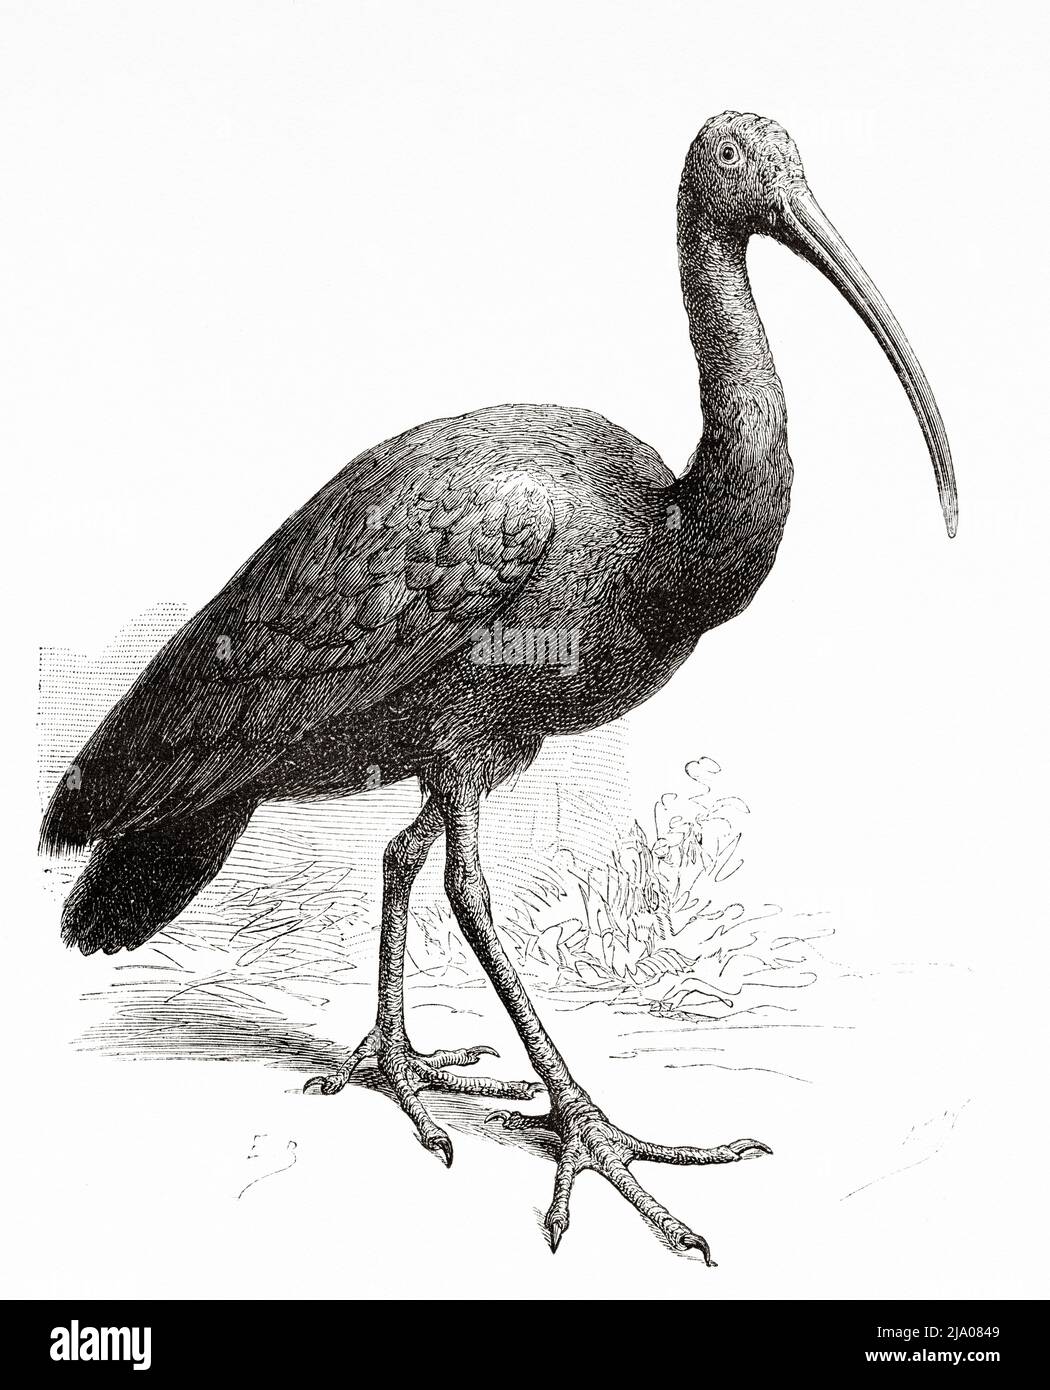 The giant ibis (Thaumatibis gigantea) is the only species in the monotypic genus Thaumatibis, it is a wading bird in the ibis family, Threskiornithidae, Attapeu province. Laos. Southeast Asia. Laos and the wild populations of Indo-China by Doctor Harmand 1877 Stock Photo